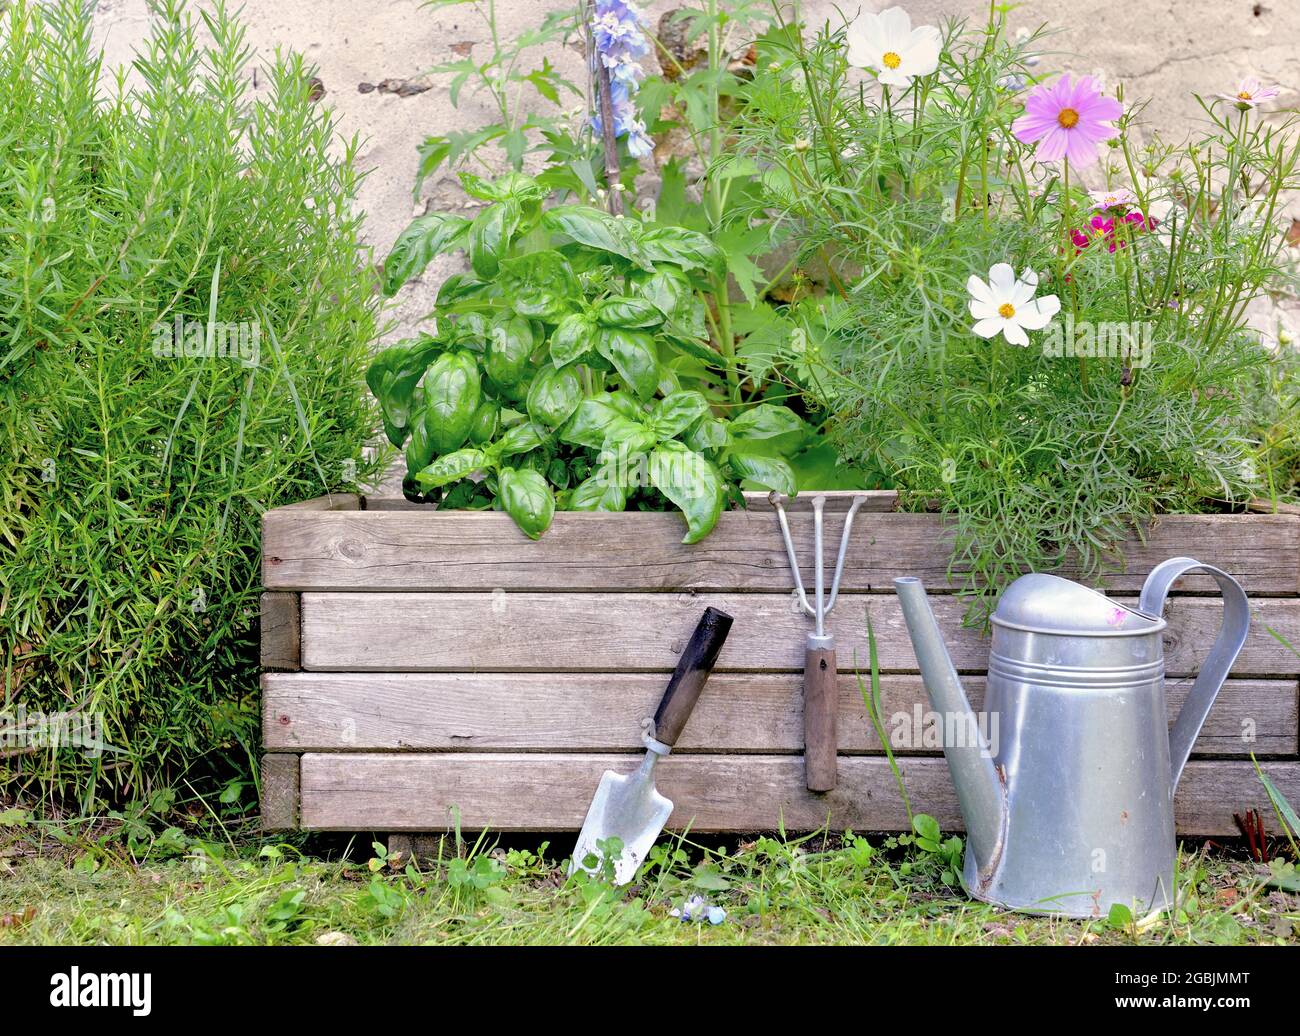 aromatic plant and and flowers in a wooden gardener with gardening tools Stock Photo